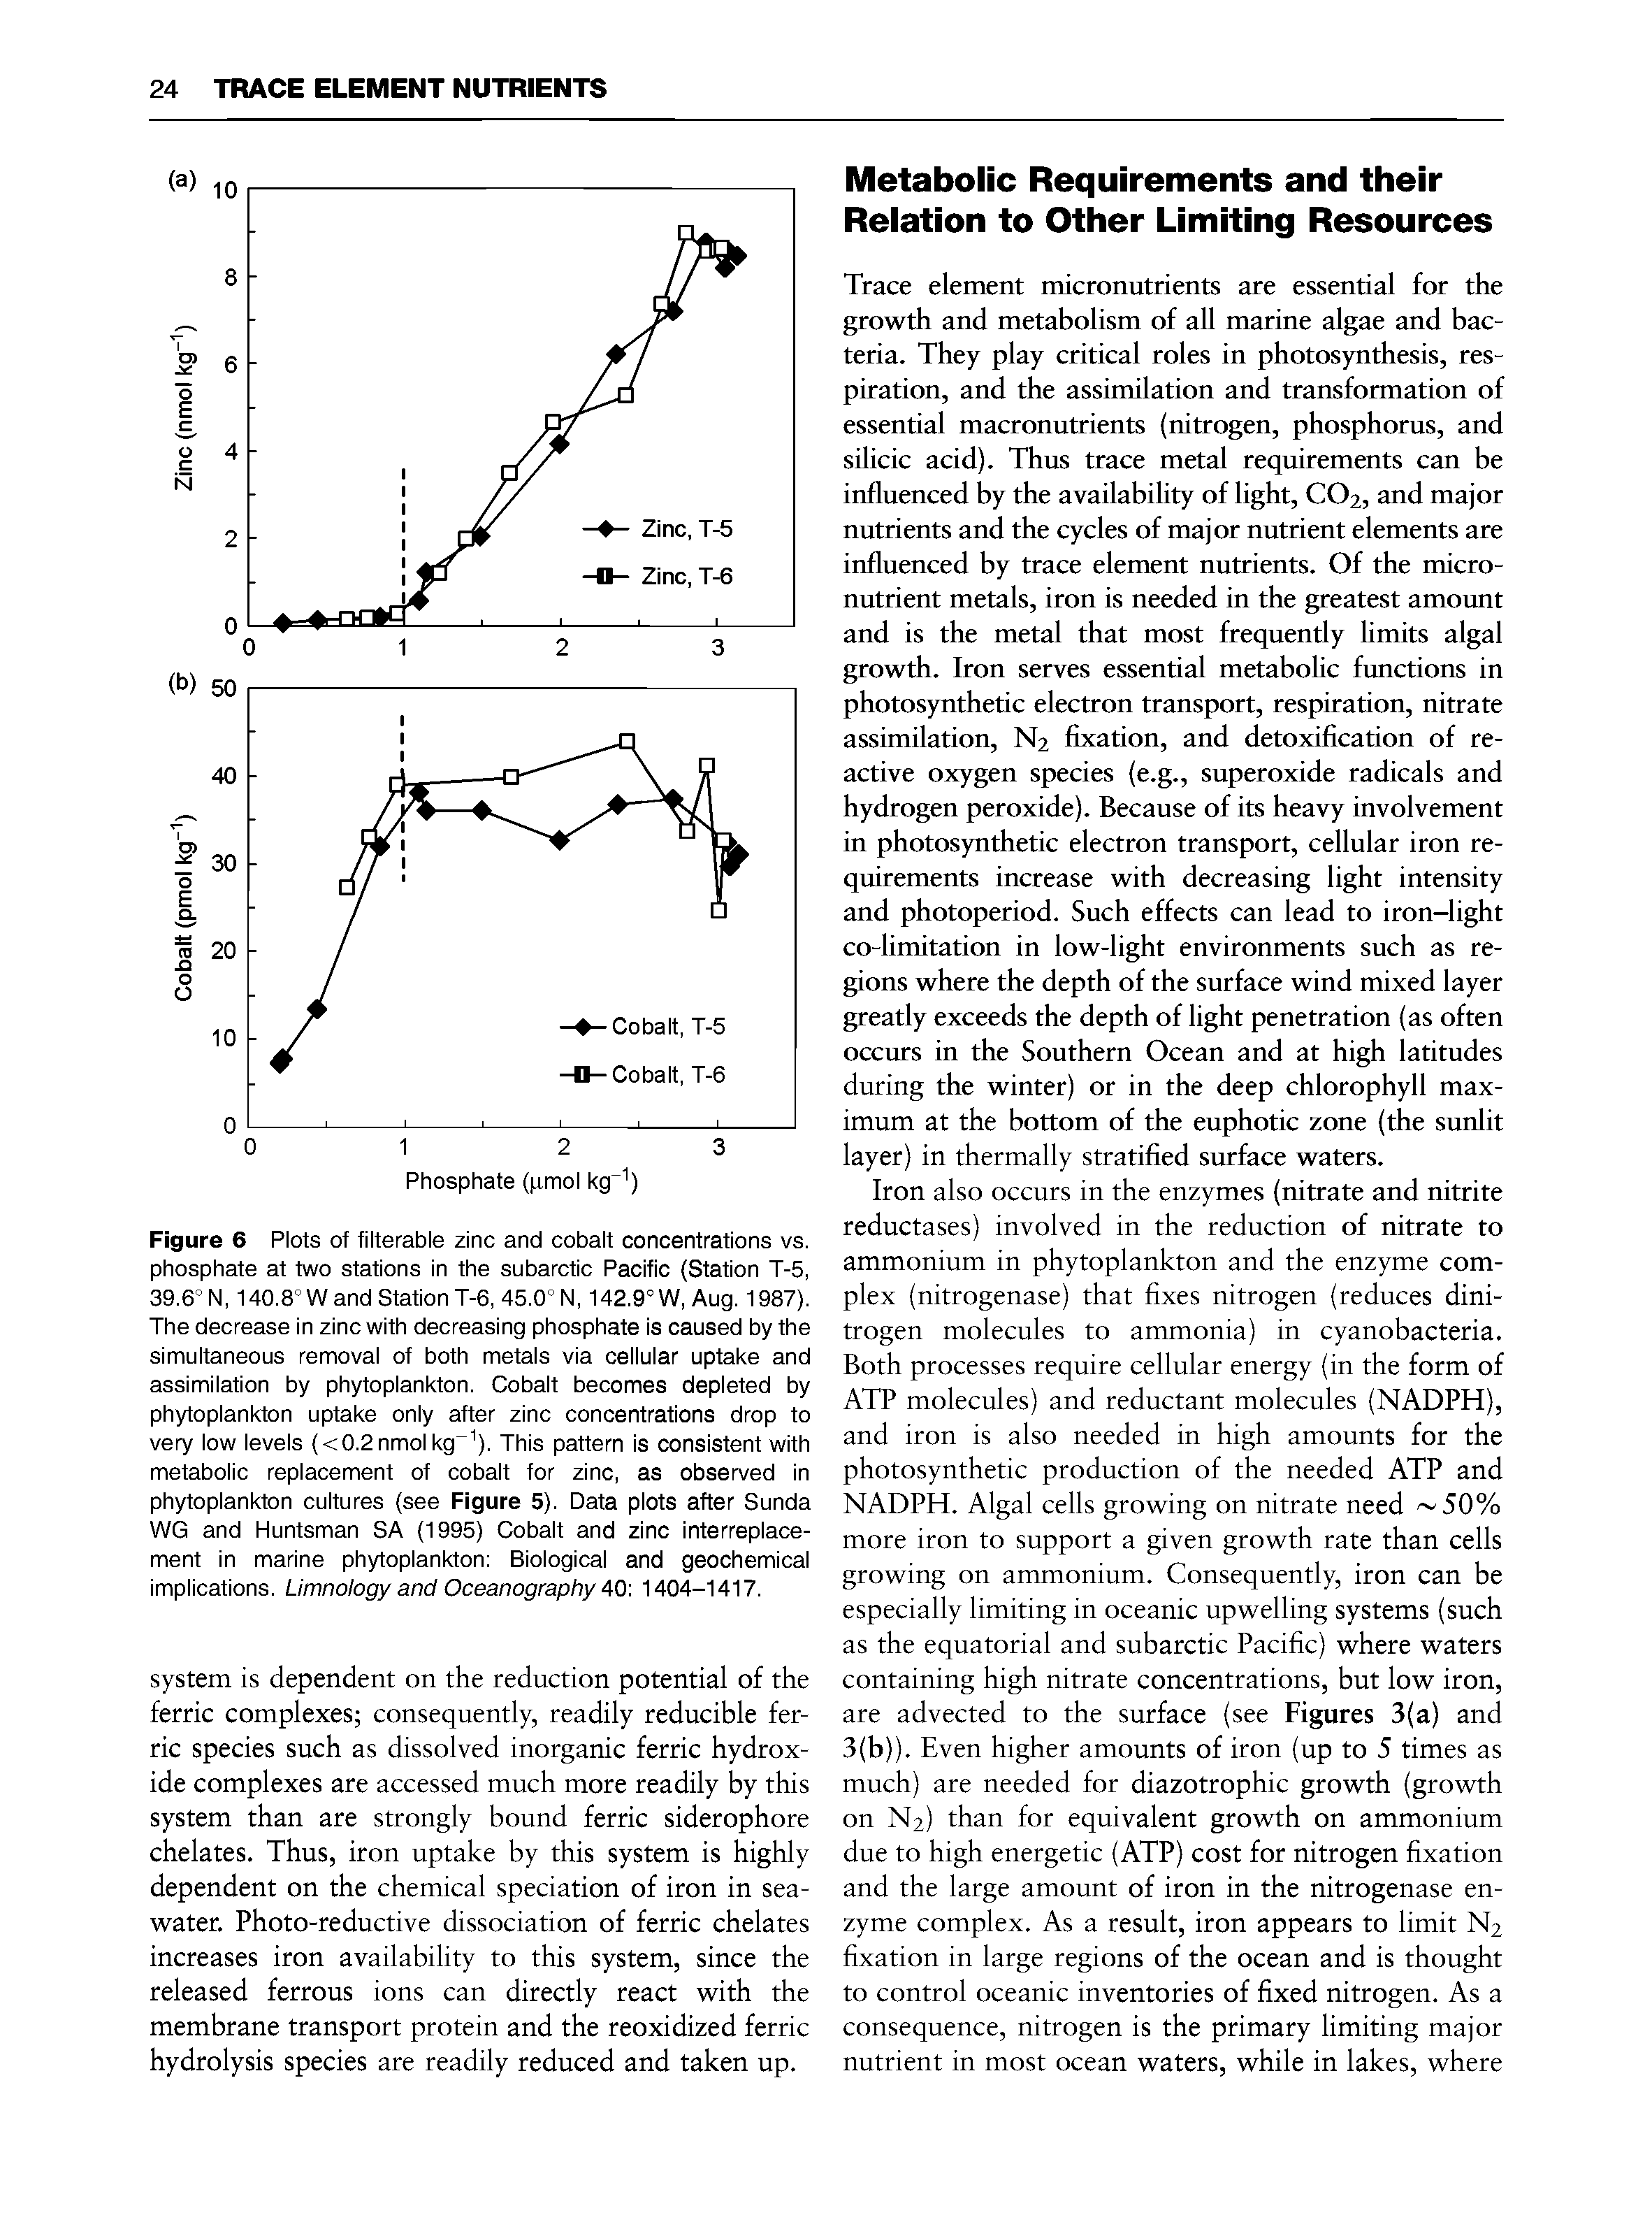 Figure 6 Plots of filterable zinc and cobalt concentrations vs. phosphate at two stations in the subarctic Pacific (Station T-5, 39.6° N, 140.8° Wand Station T-6, 45.0° N, 142.9° W, Aug. 1987). The decrease in zinc with decreasing phosphate is caused by the simultaneous removal of both metals via cellular uptake and assimilation by phytoplankton. Cobalt becomes depleted by phytoplankton uptake only after zinc concentrations drop to very low levels <0.2nmol kg ). This pattern is consistent with metabolic replacement of cobalt for zinc, as observed in phytoplankton cultures (see Figure 5). Data plots after Sunda WG and Huntsman SA (1995) Cobalt and zinc interreplacement in marine phytoplankton Biological and geochemical implications. Limnology and Oceanography 40 1404-1417.